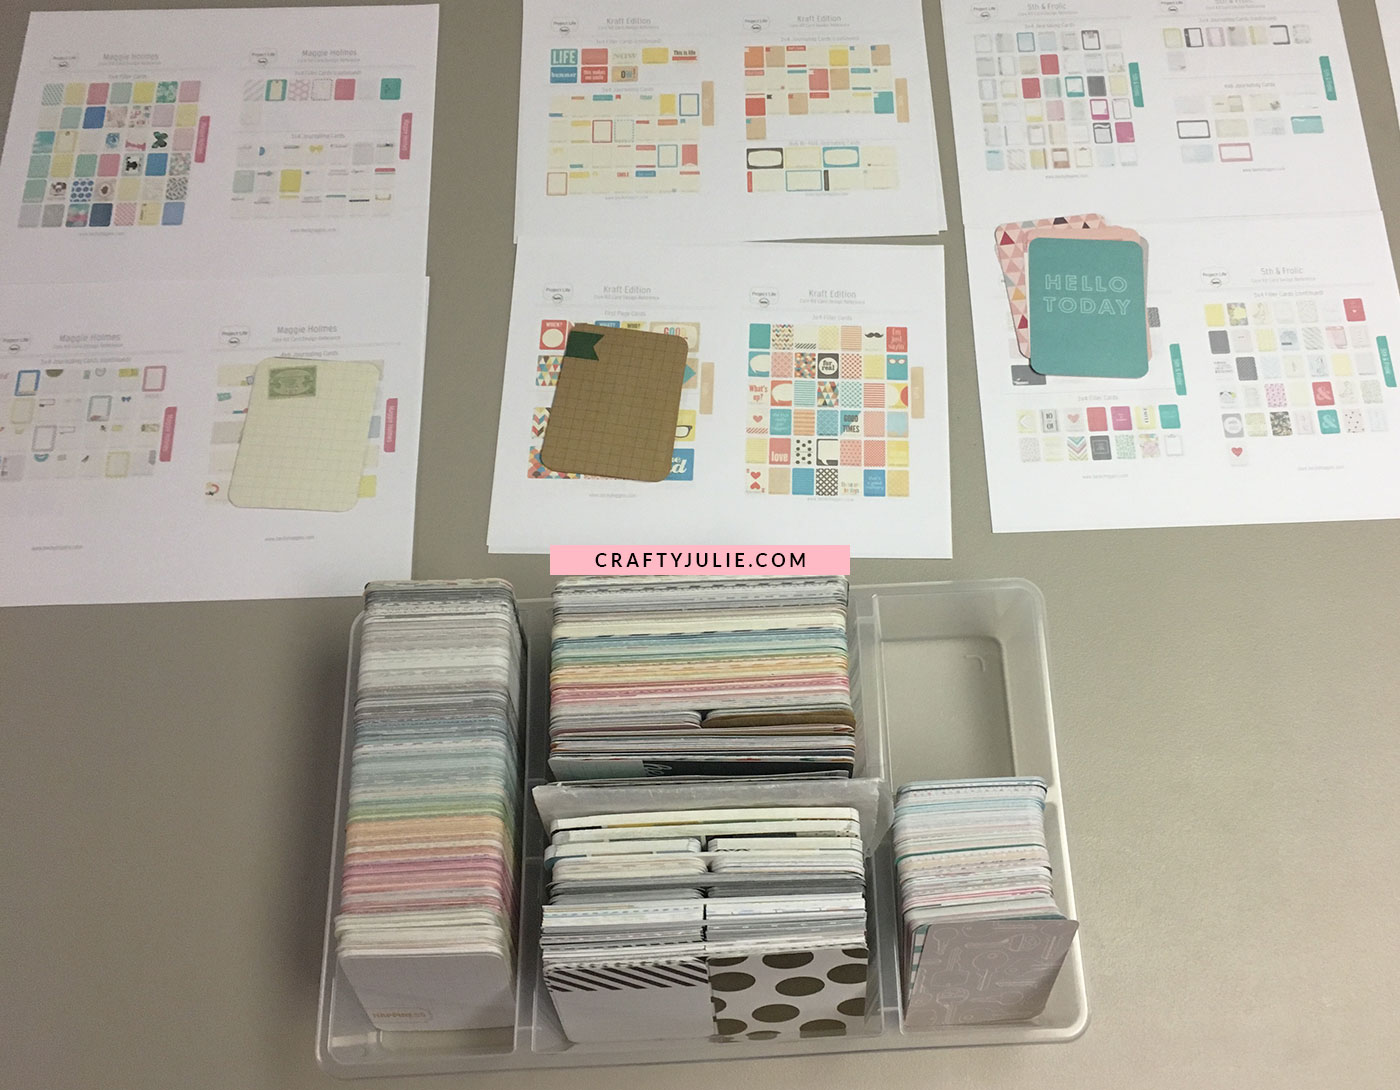 Crafty Julie | 5 Easy Steps to Organize Project Life Cards | Before Sorting Project Life Cards